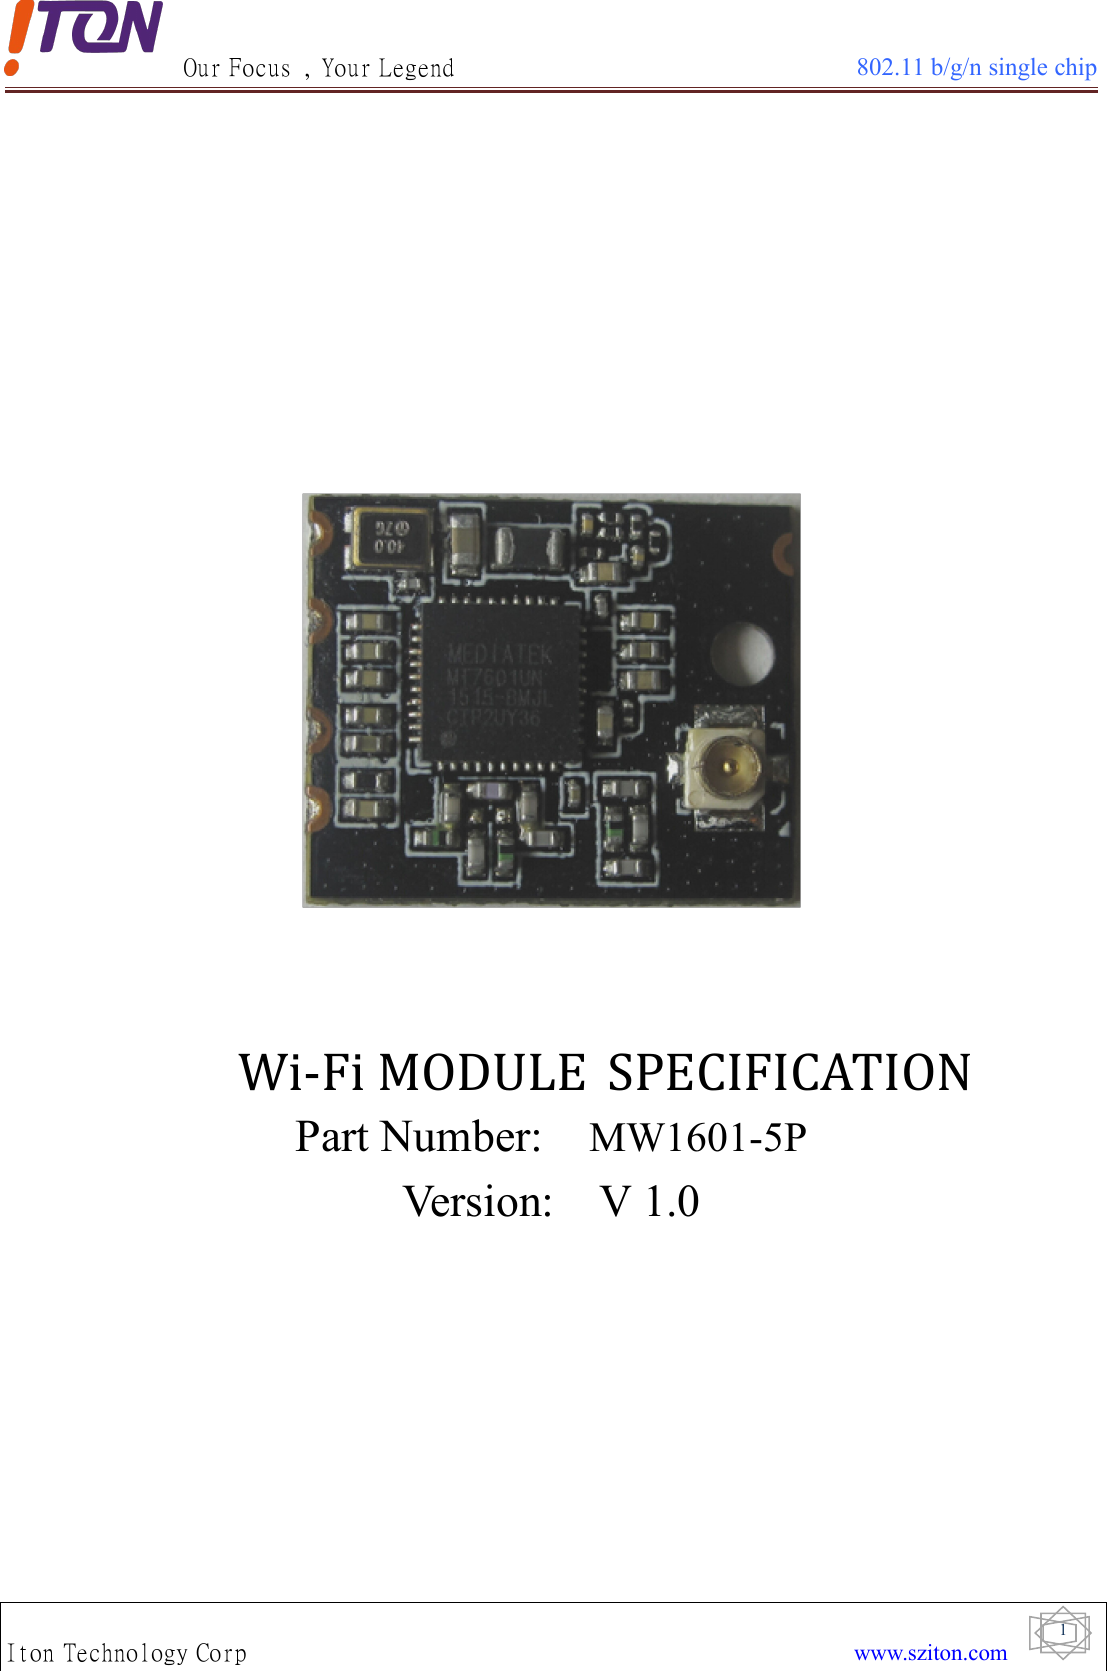 Our Focus , Your Legend 802.11 b/g/n single chipIton Technology Corp www.sziton.com1Wi-Fi MODULE SPECIFICATIONPart Number: MW1601-5PVersion: V 1.0